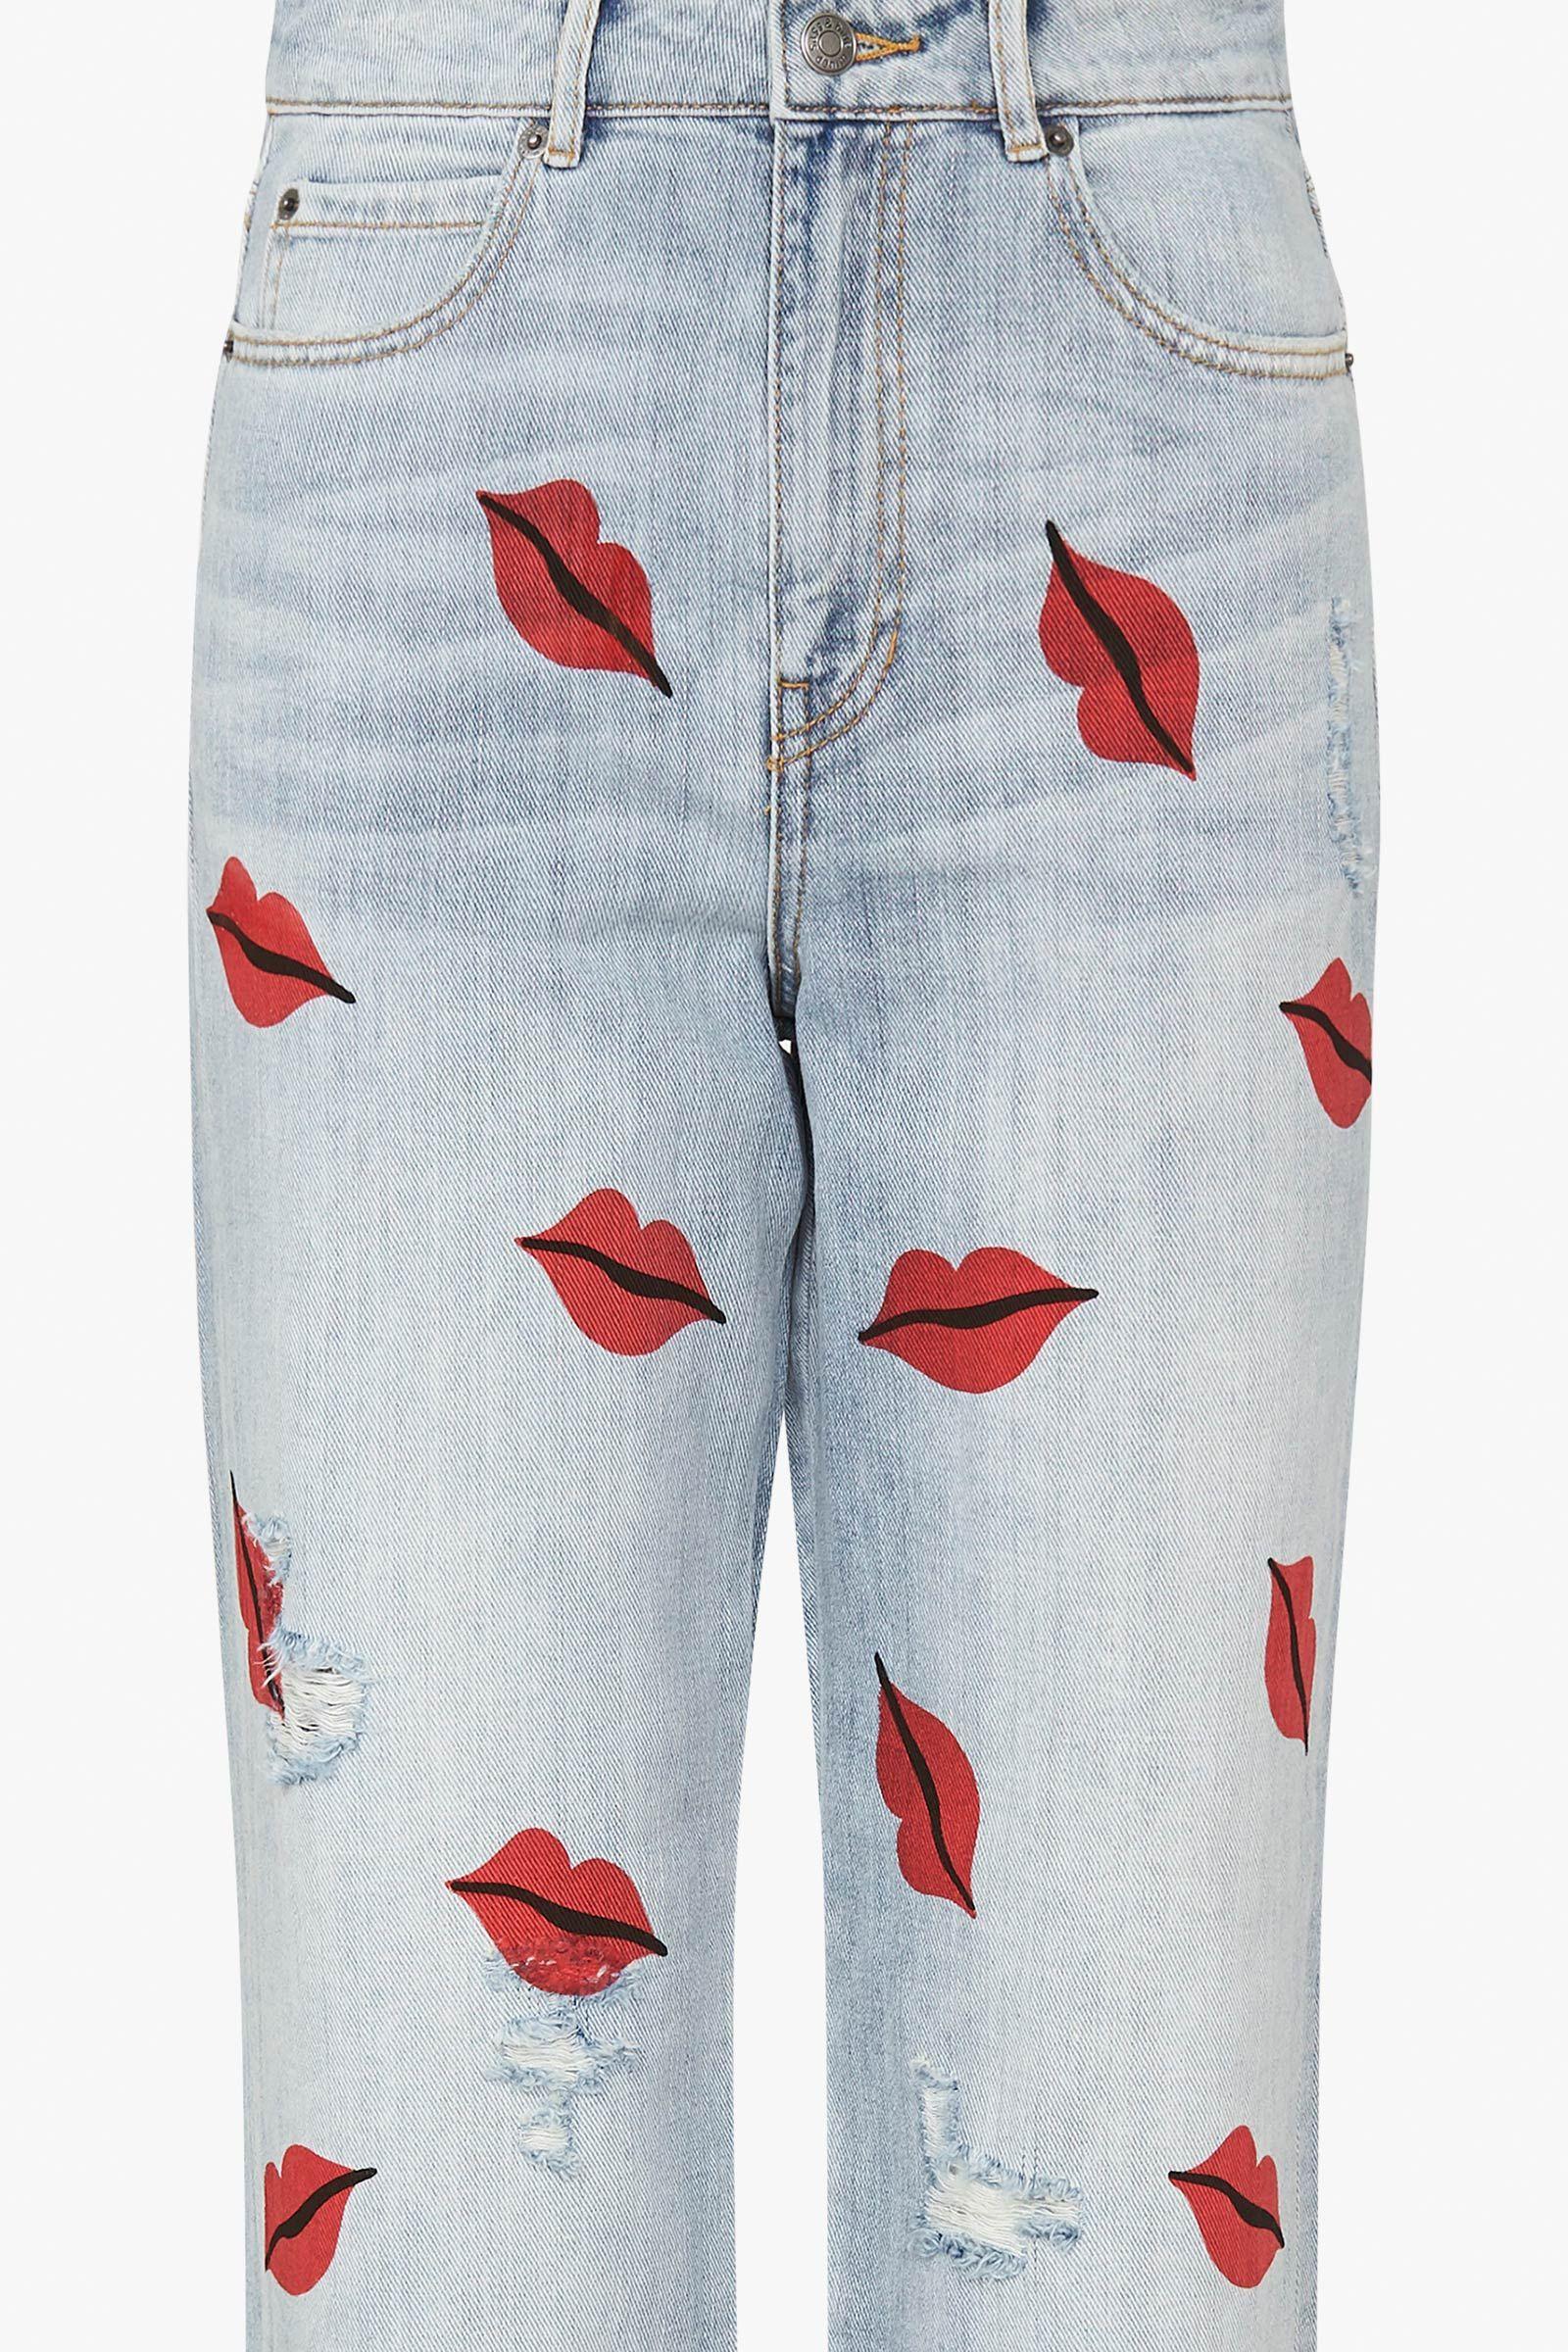 sass and bide lip jeans